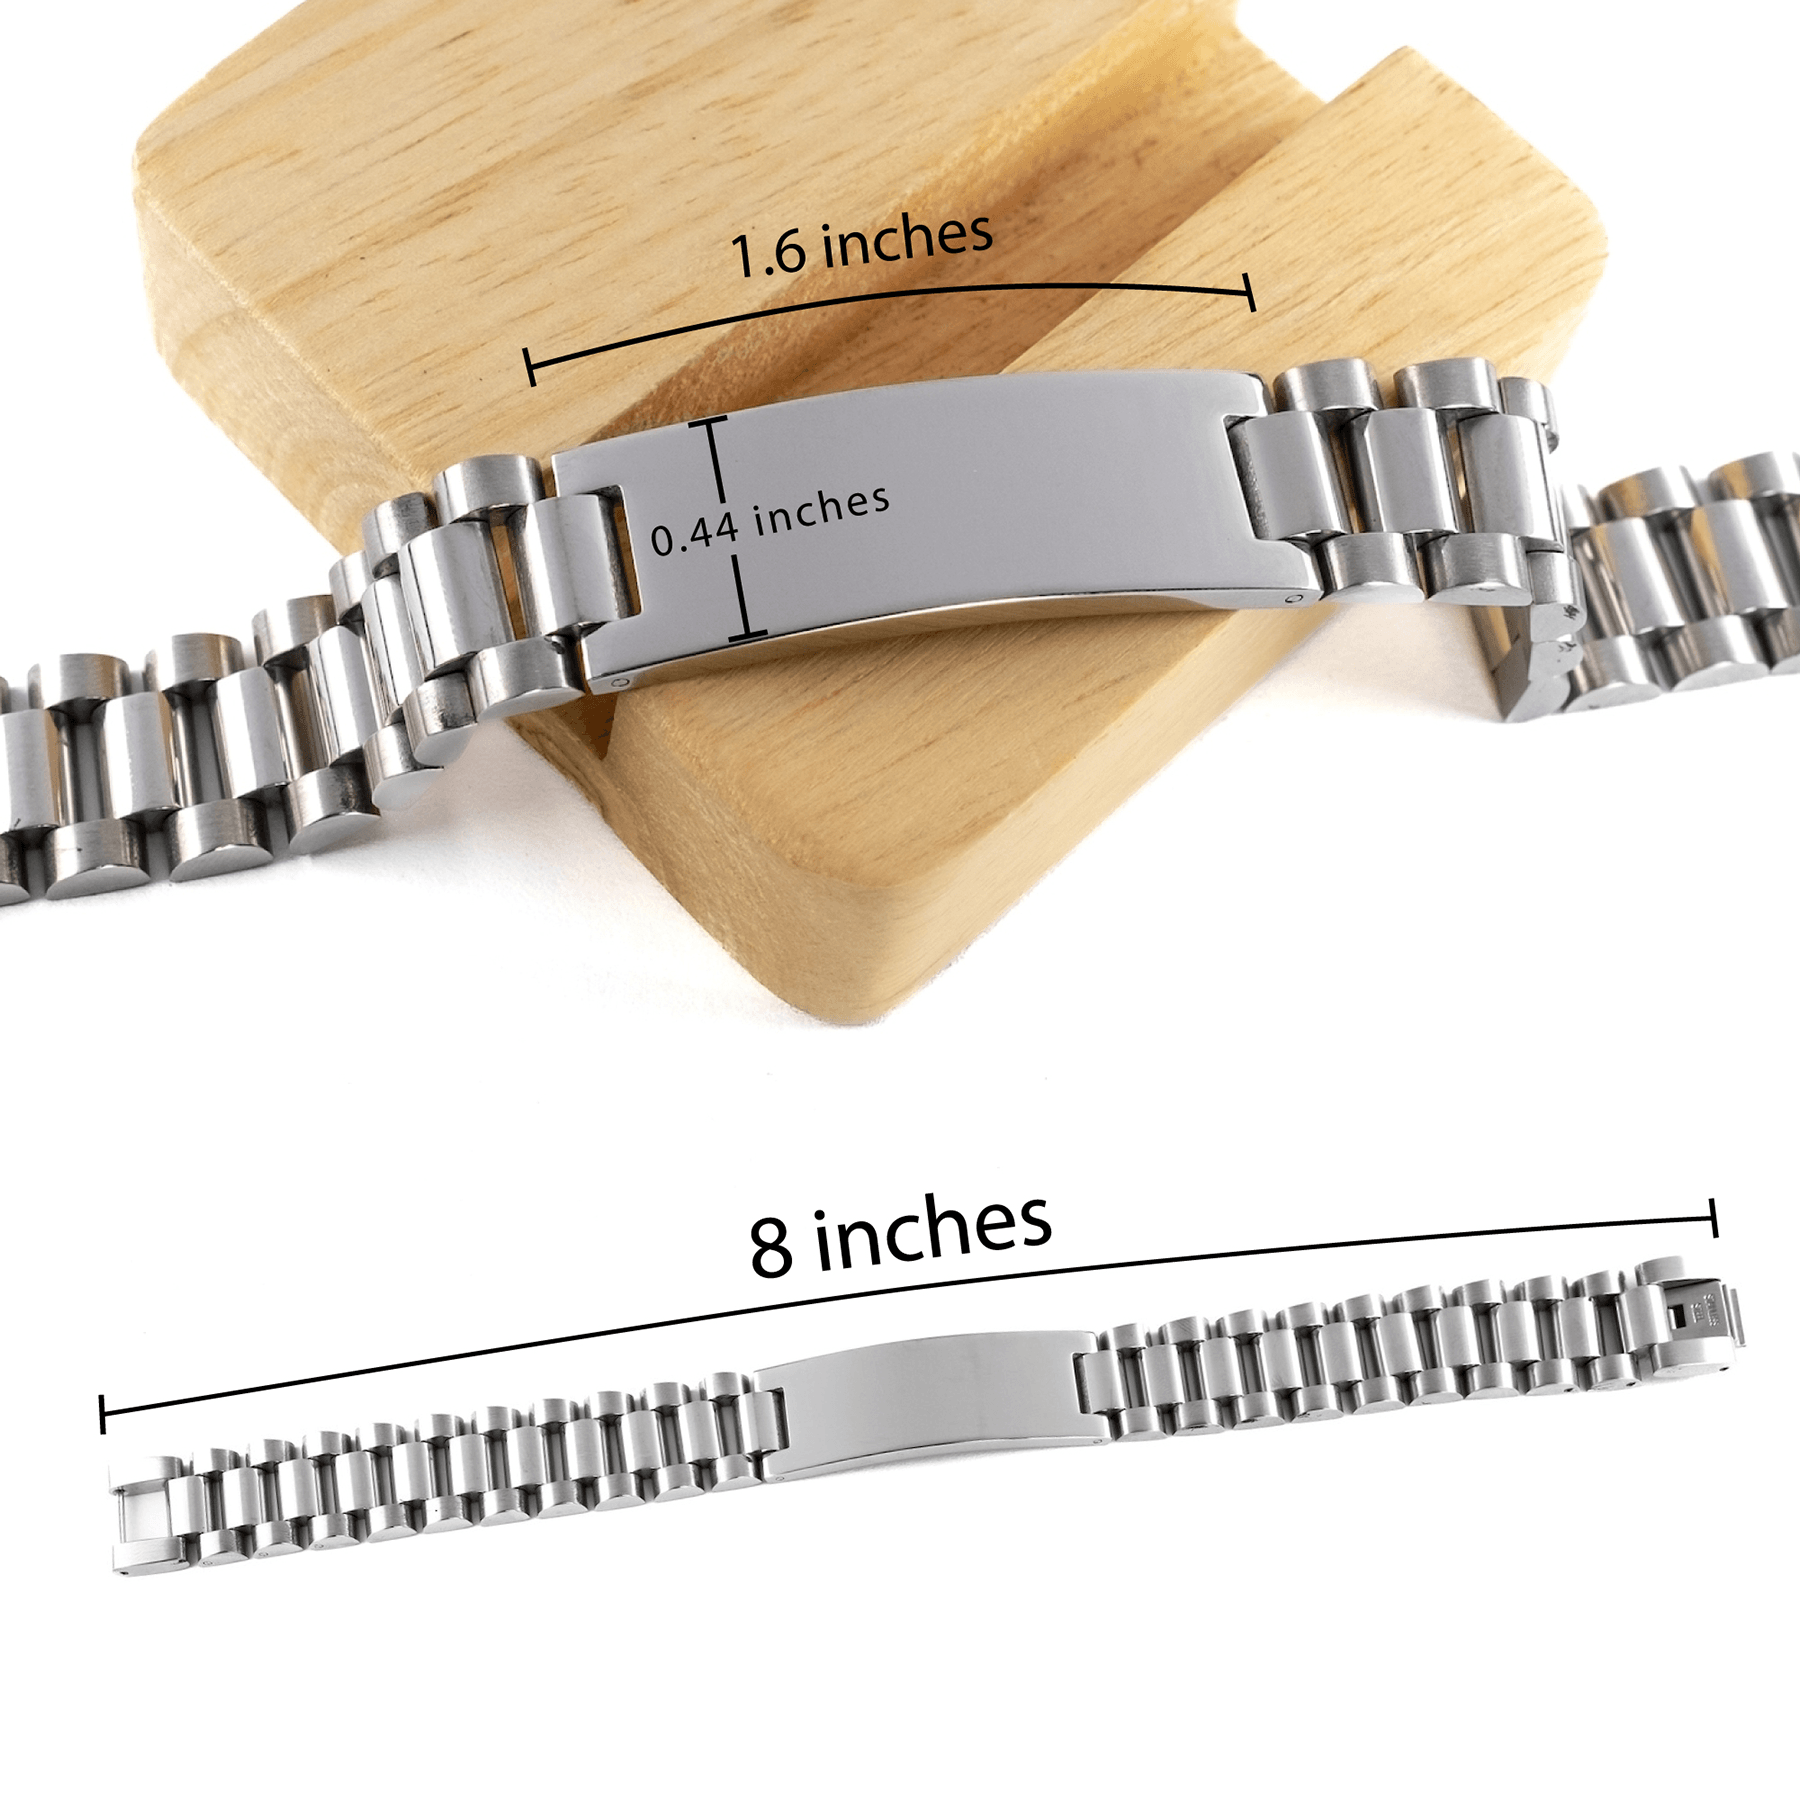 Florist Ladder Stainless Steel Engraved Bracelet - Thanks for being who you are - Birthday Christmas Jewelry Gifts Coworkers Colleague Boss - Mallard Moon Gift Shop